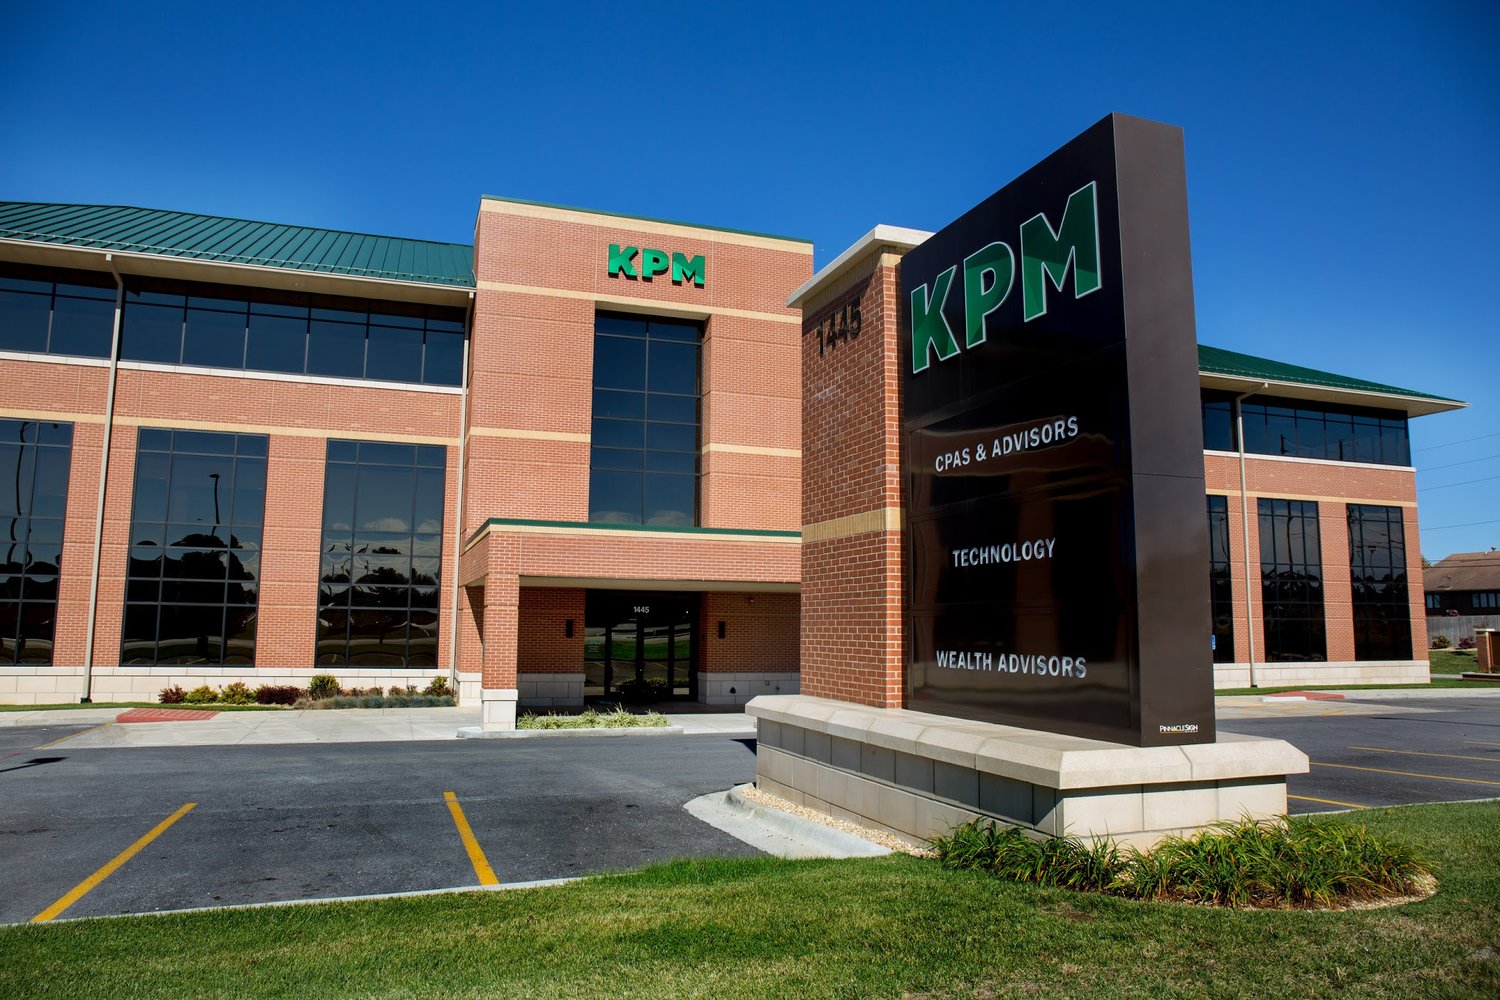 KPM CPAs & Advisors is No. 23 on Accounting Today's list of the top firms in the Midwest.